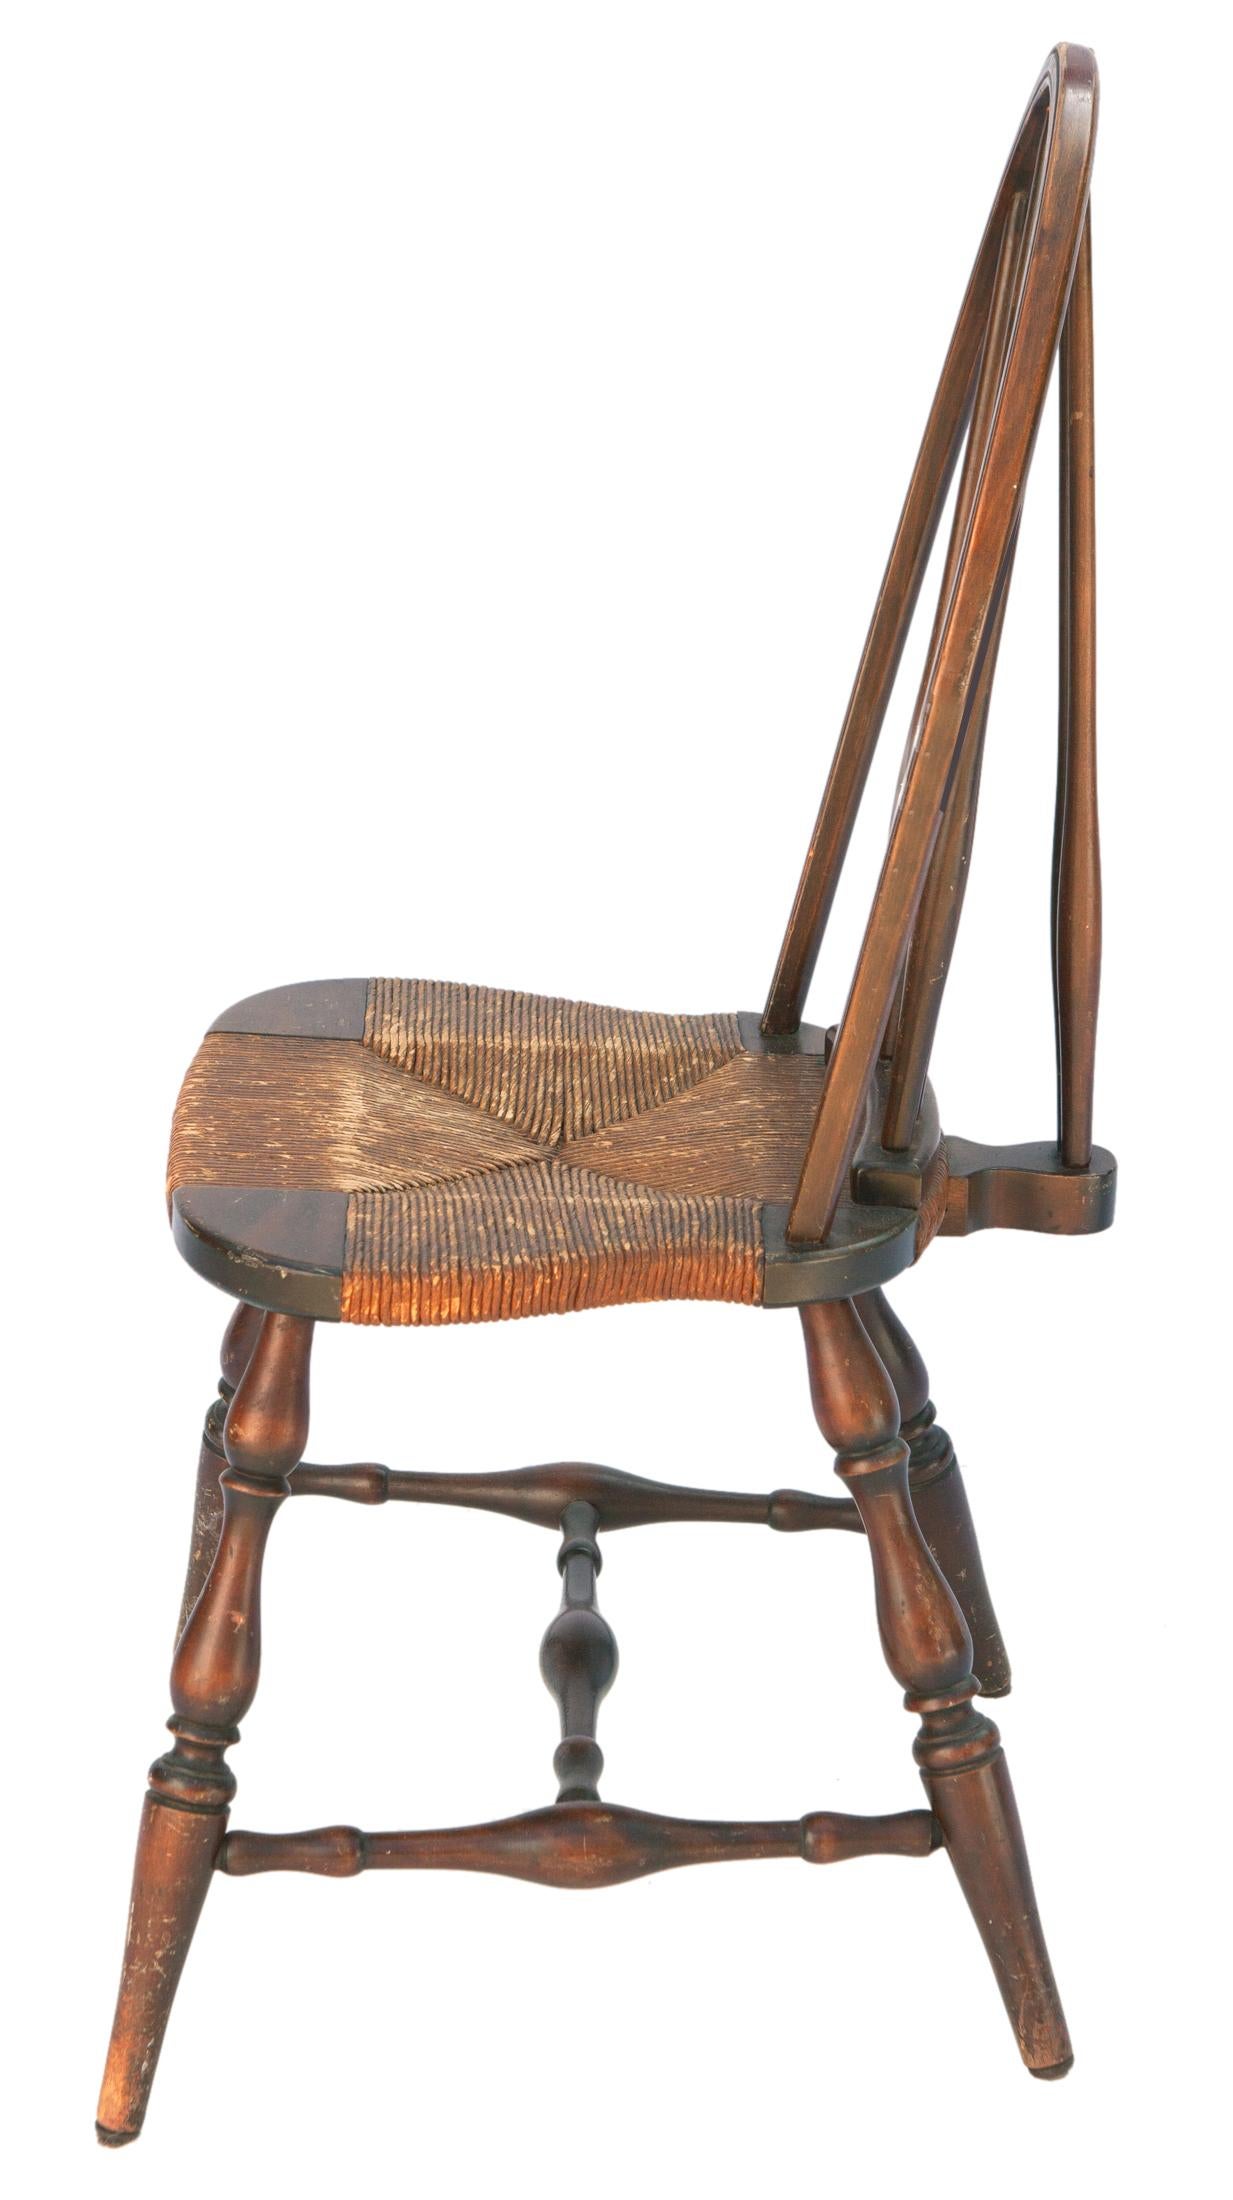 American Classical Americana Windsor Style Chair / Rush Seat For Sale